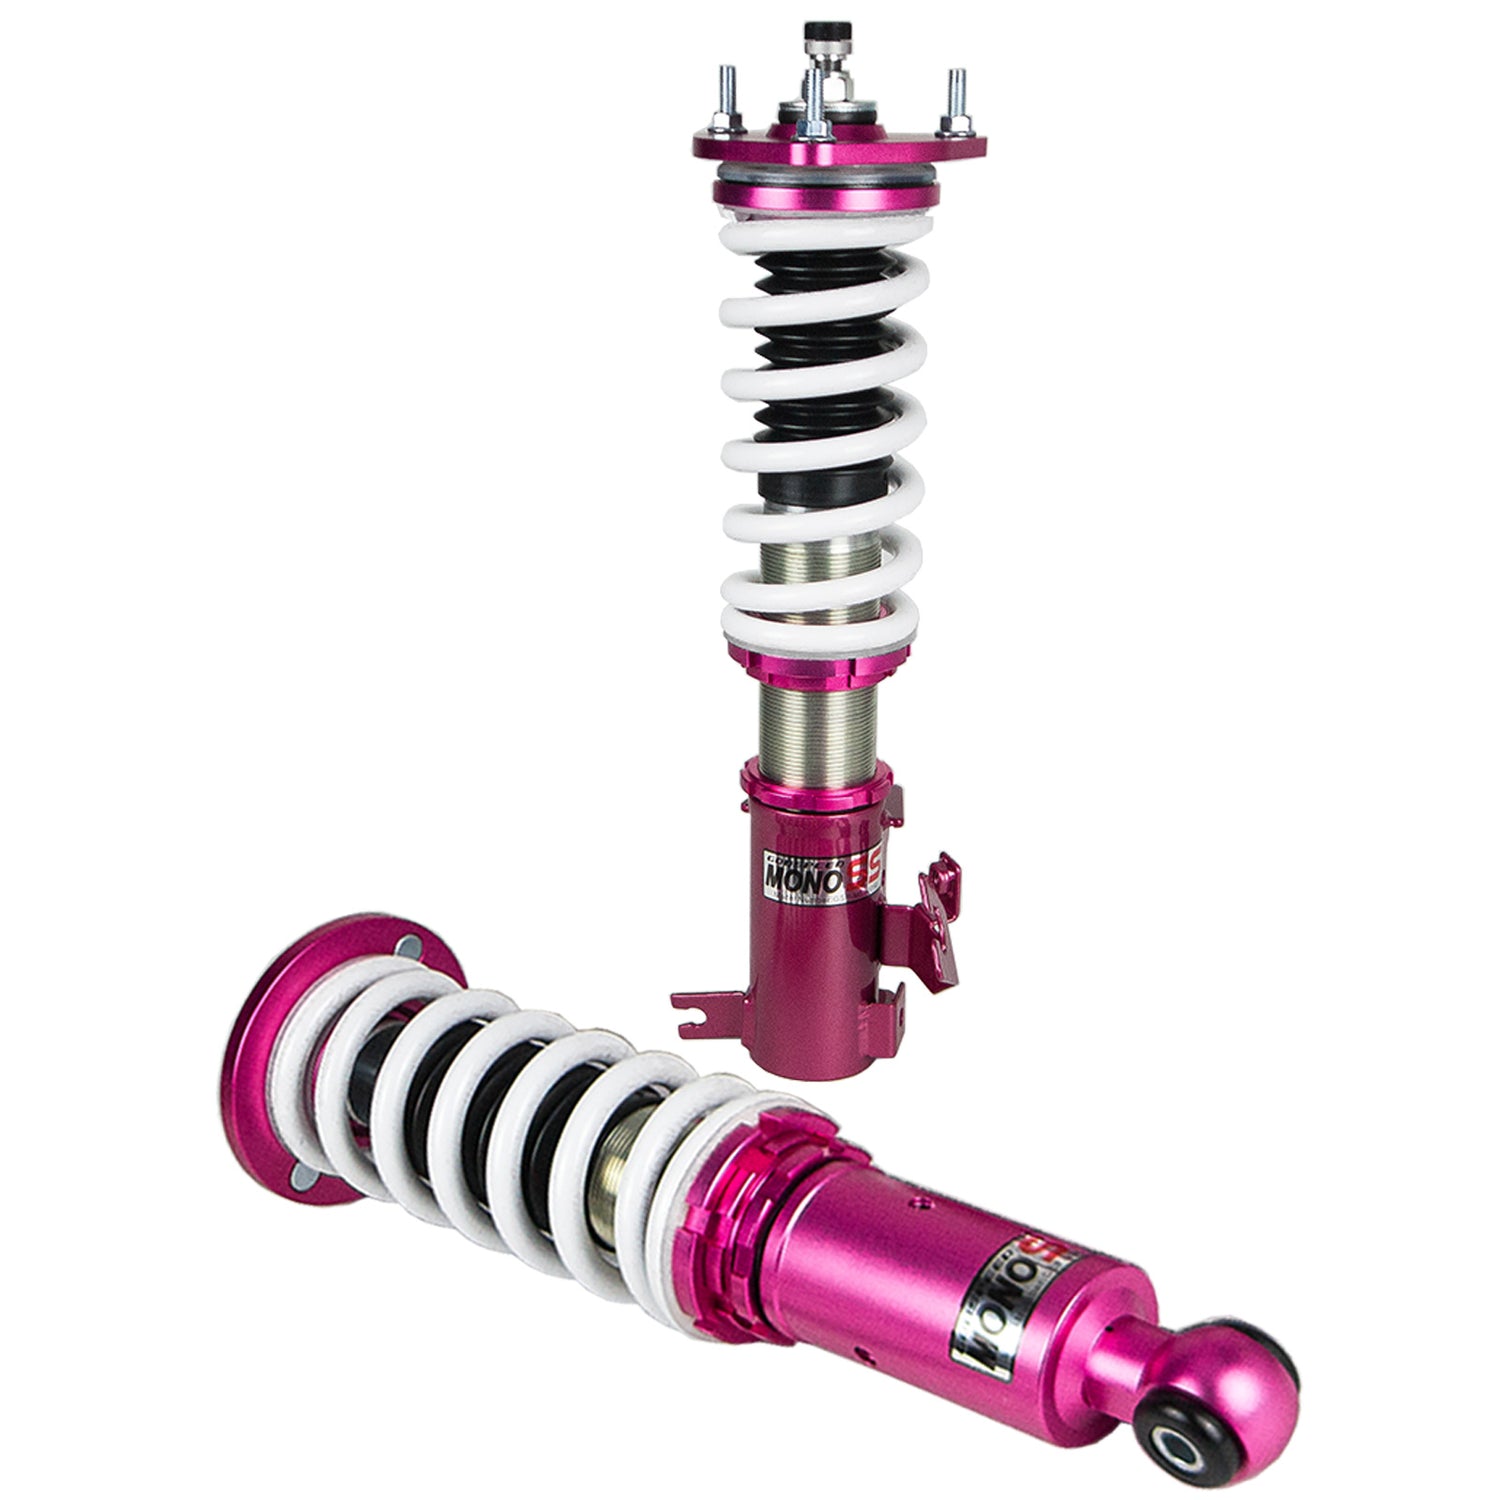 Godspeed MSS0750 MonoSS Coilover Lowering Kit, Fully Adjustable, Ride Height, Spring Tension And 16 Click Damping, Nissan Sentra(B14) 1995-99